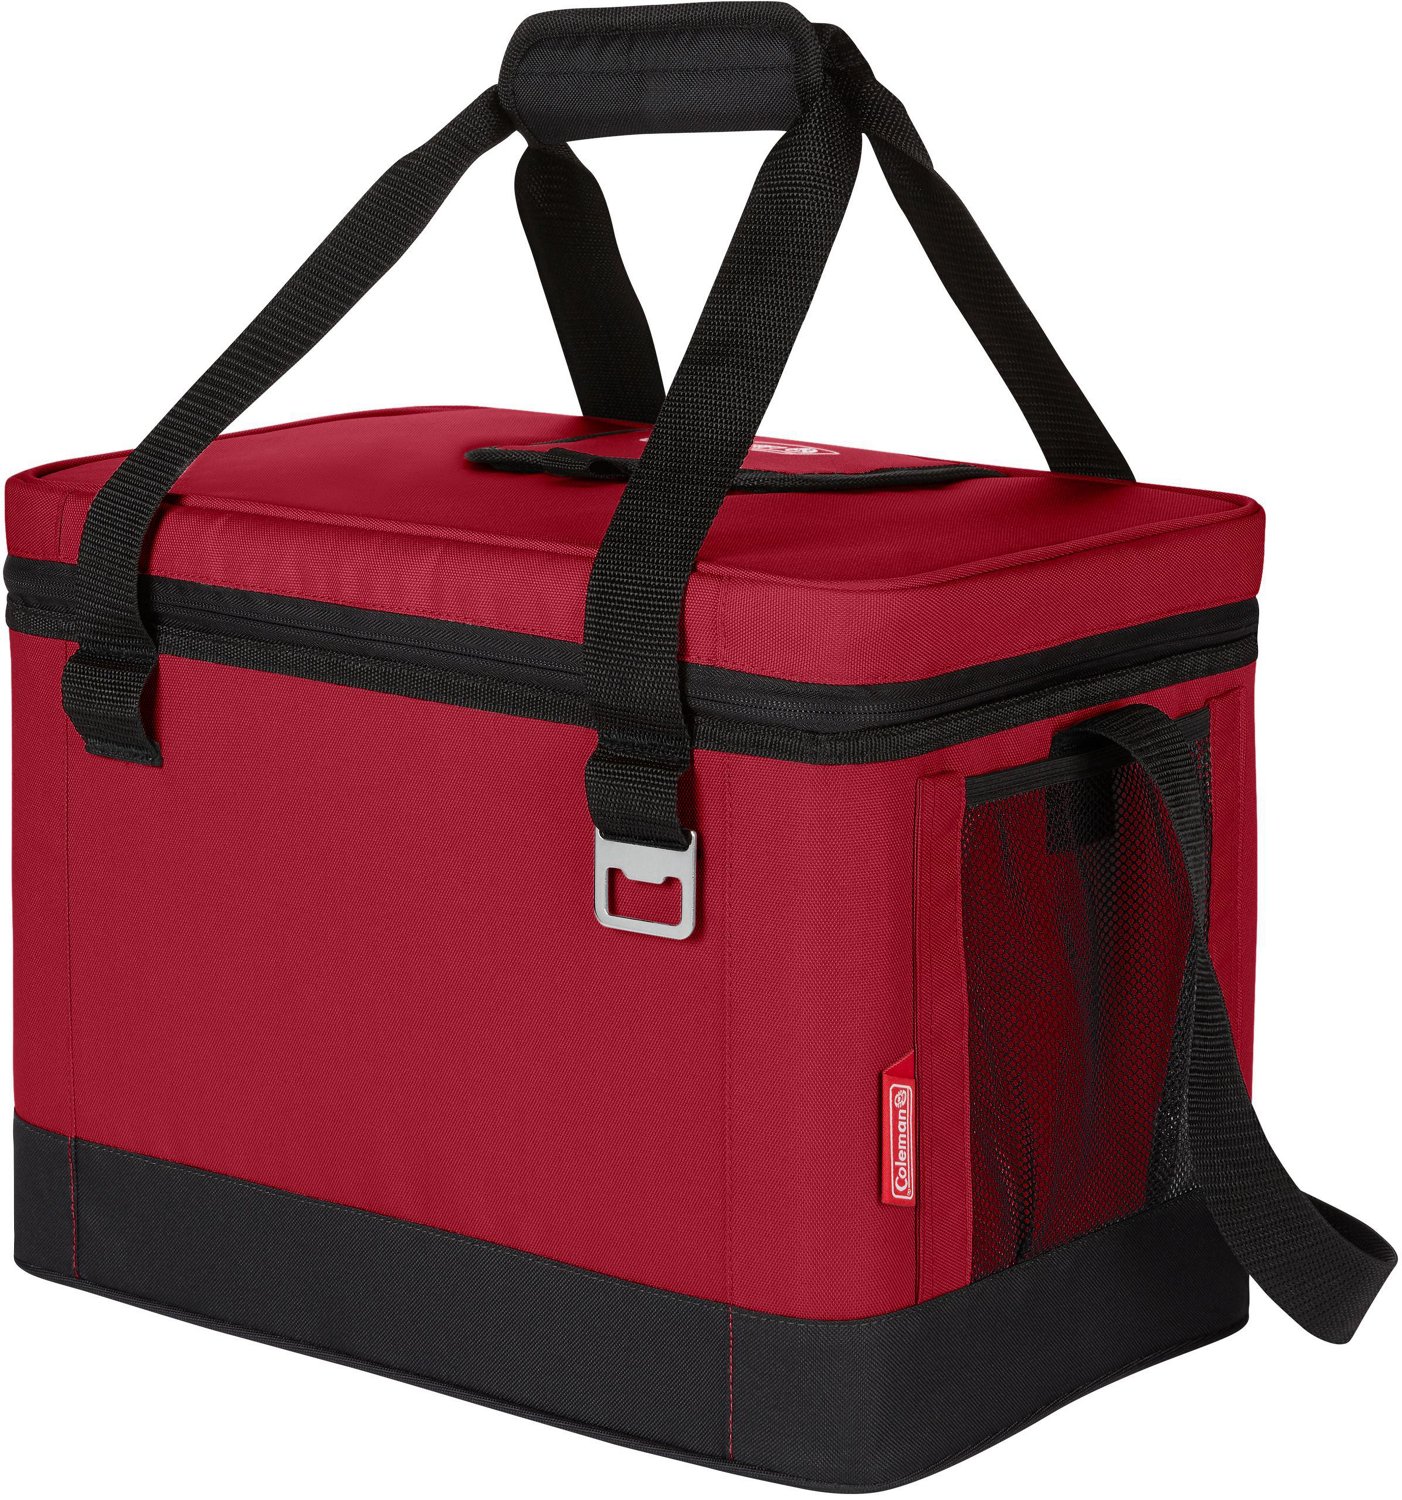 COLEMAN SOFT COOLER - 30 CAN | Free Shipping at Academy